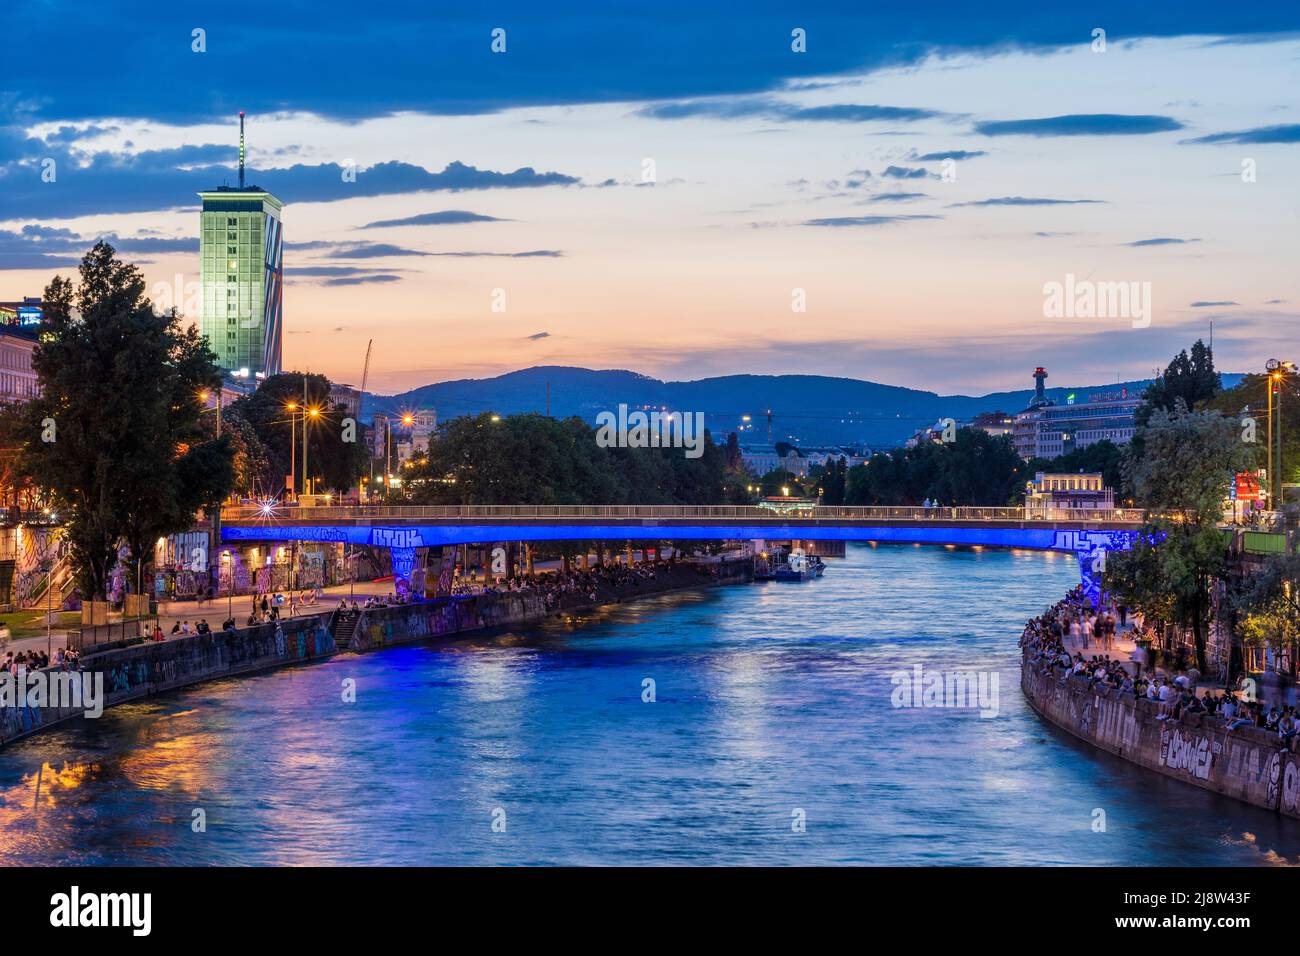 Wien, Vienna: river Donaukanal (Danube Canal), people sit on bank reinforcement, outdoor restaurants and bars, Ringturm high-rise in 01. Old Town, Wie Stock Photo